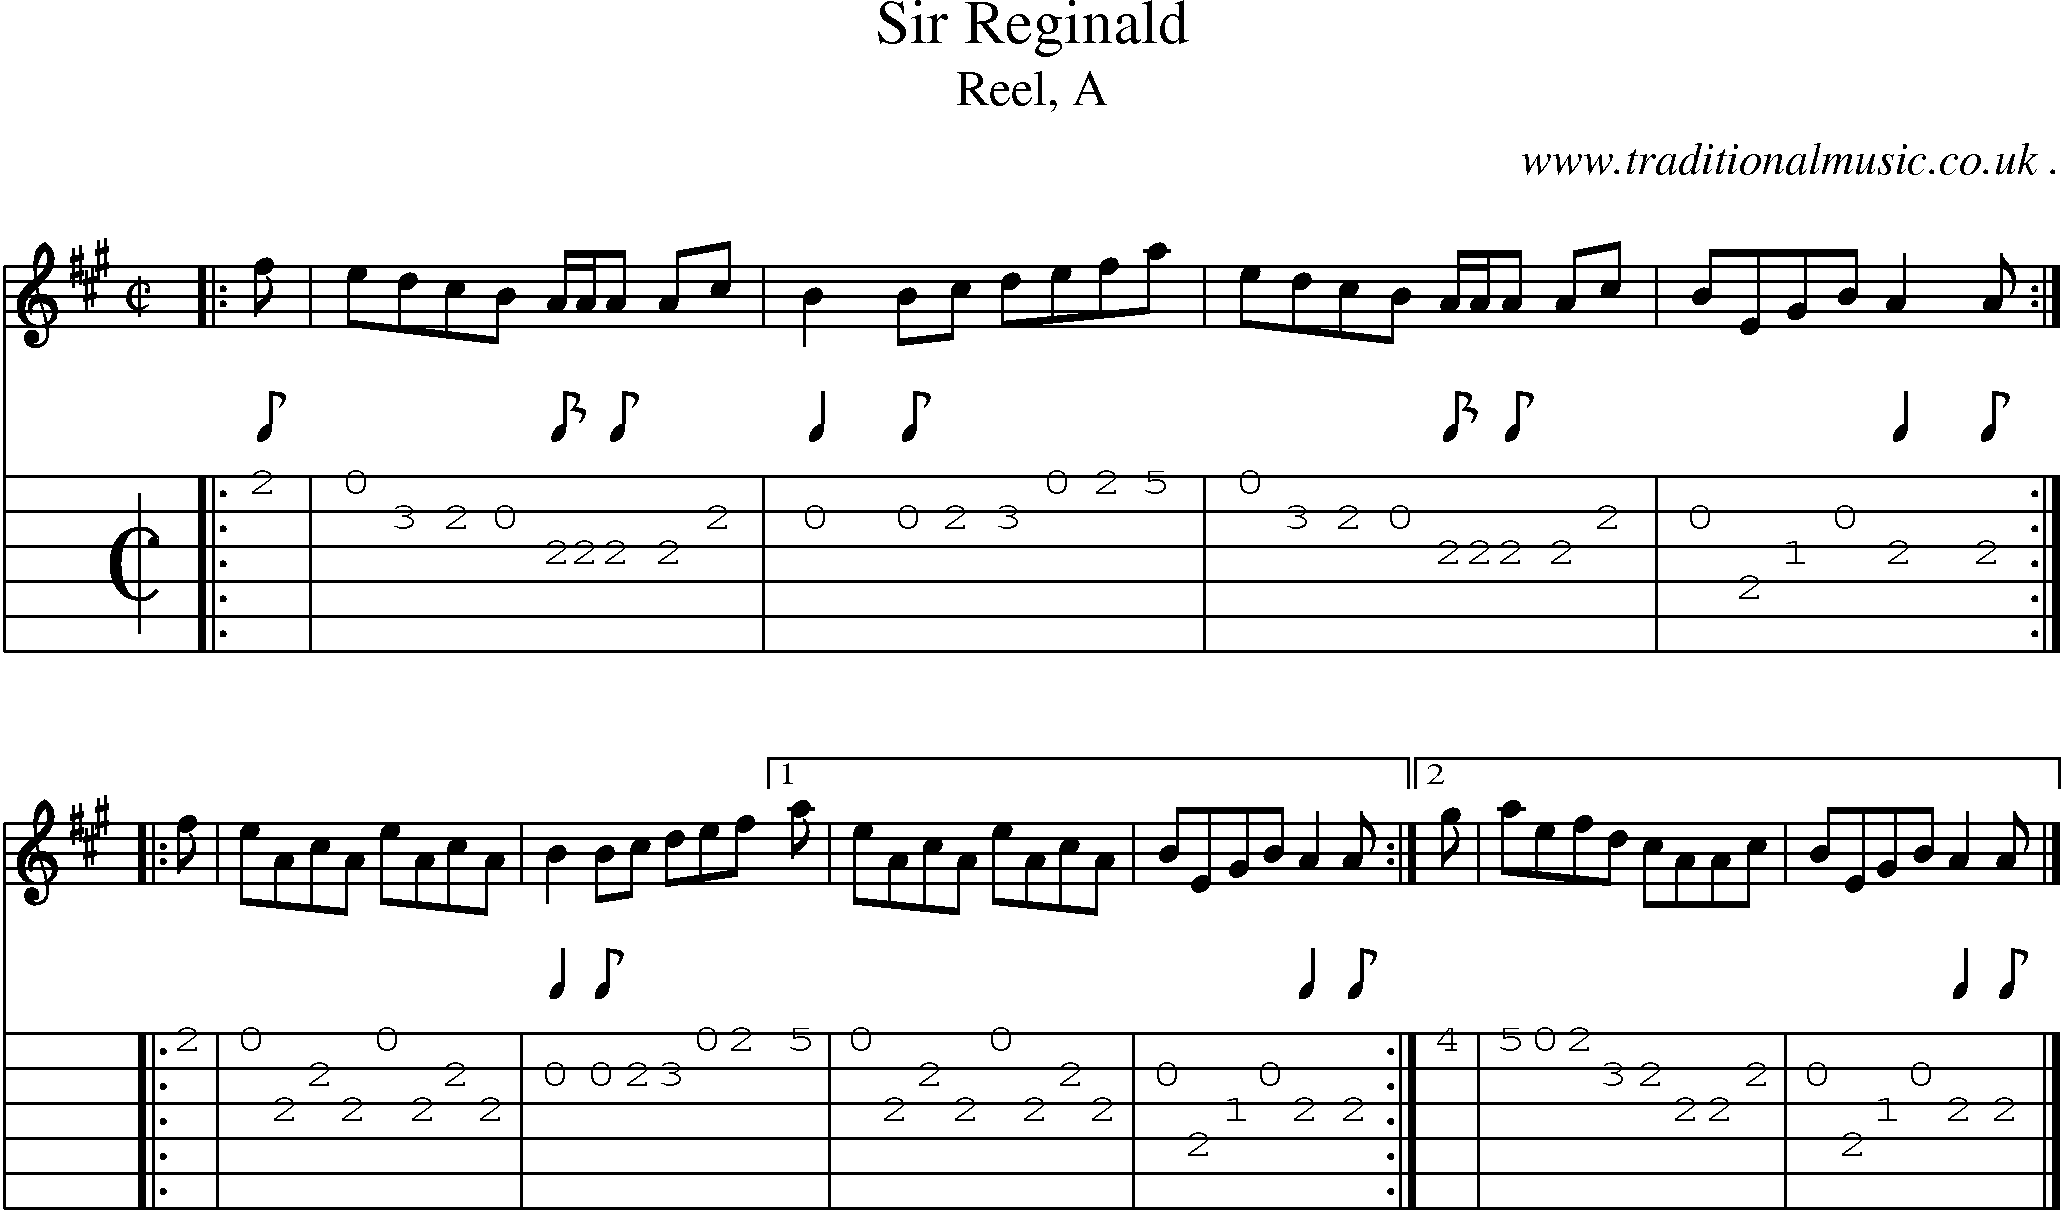 Sheet-music  score, Chords and Guitar Tabs for Sir Reginald